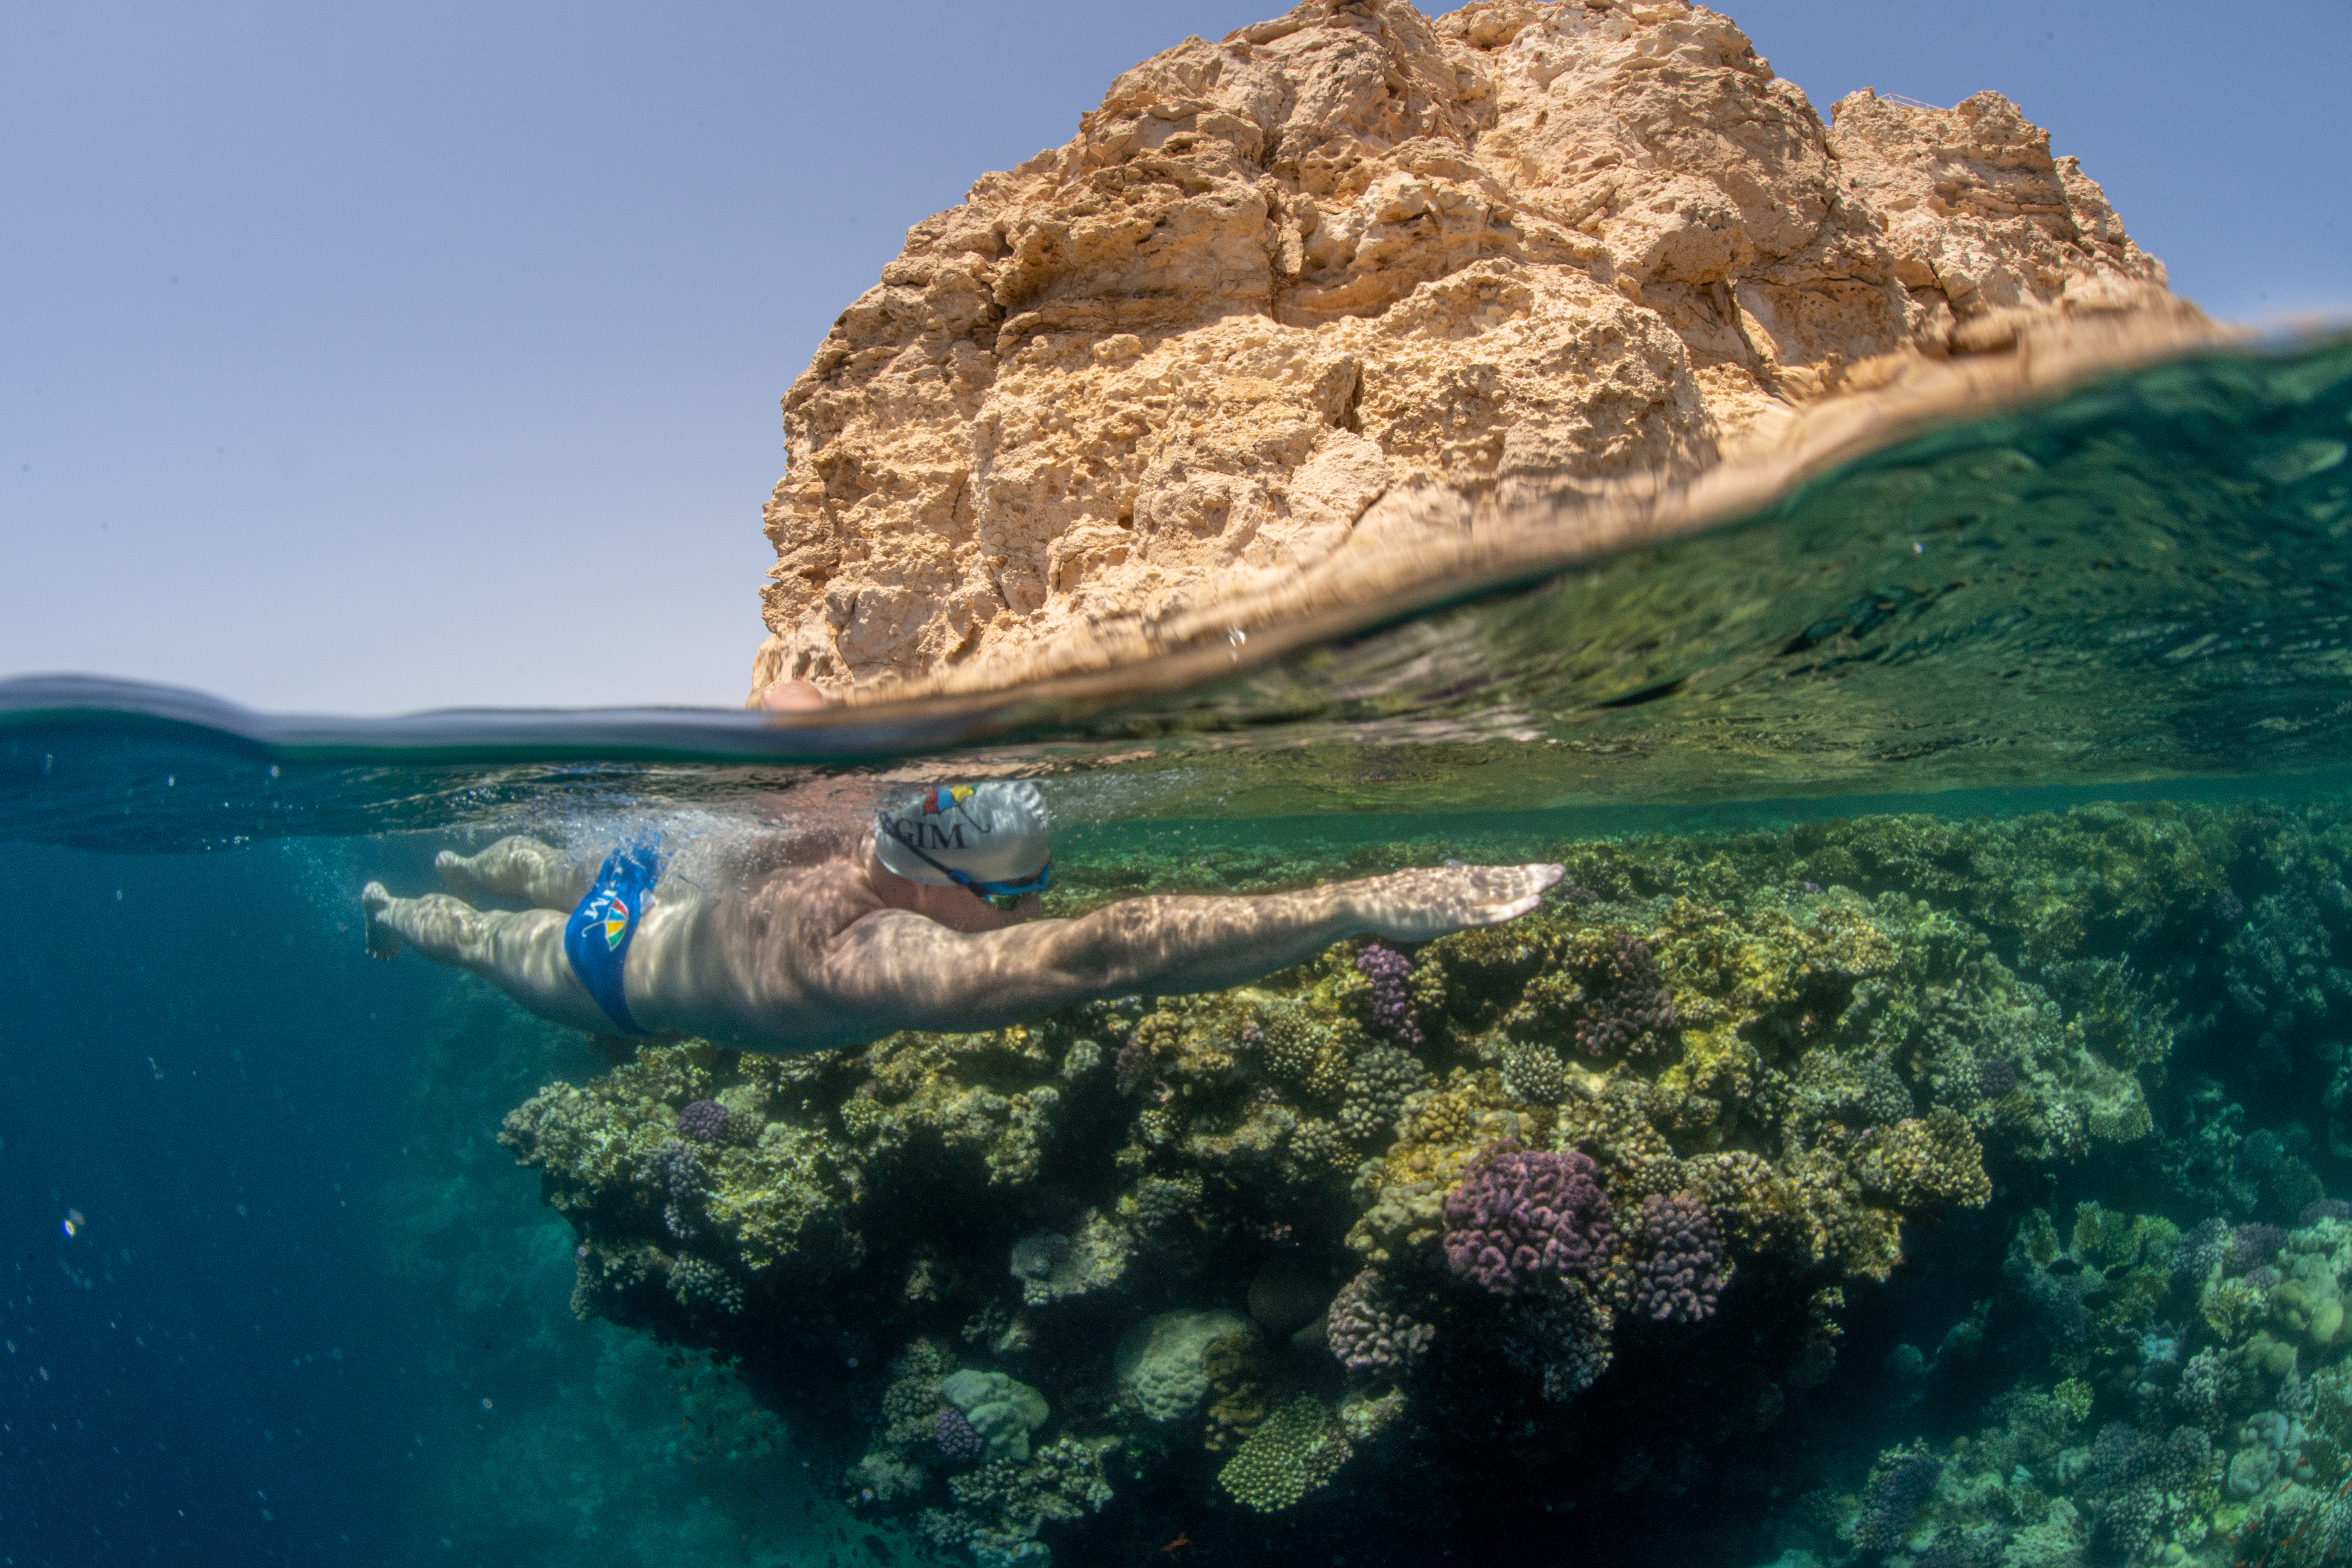 View of Lewis Pugh swimming past underwater coral and rocks above the sea